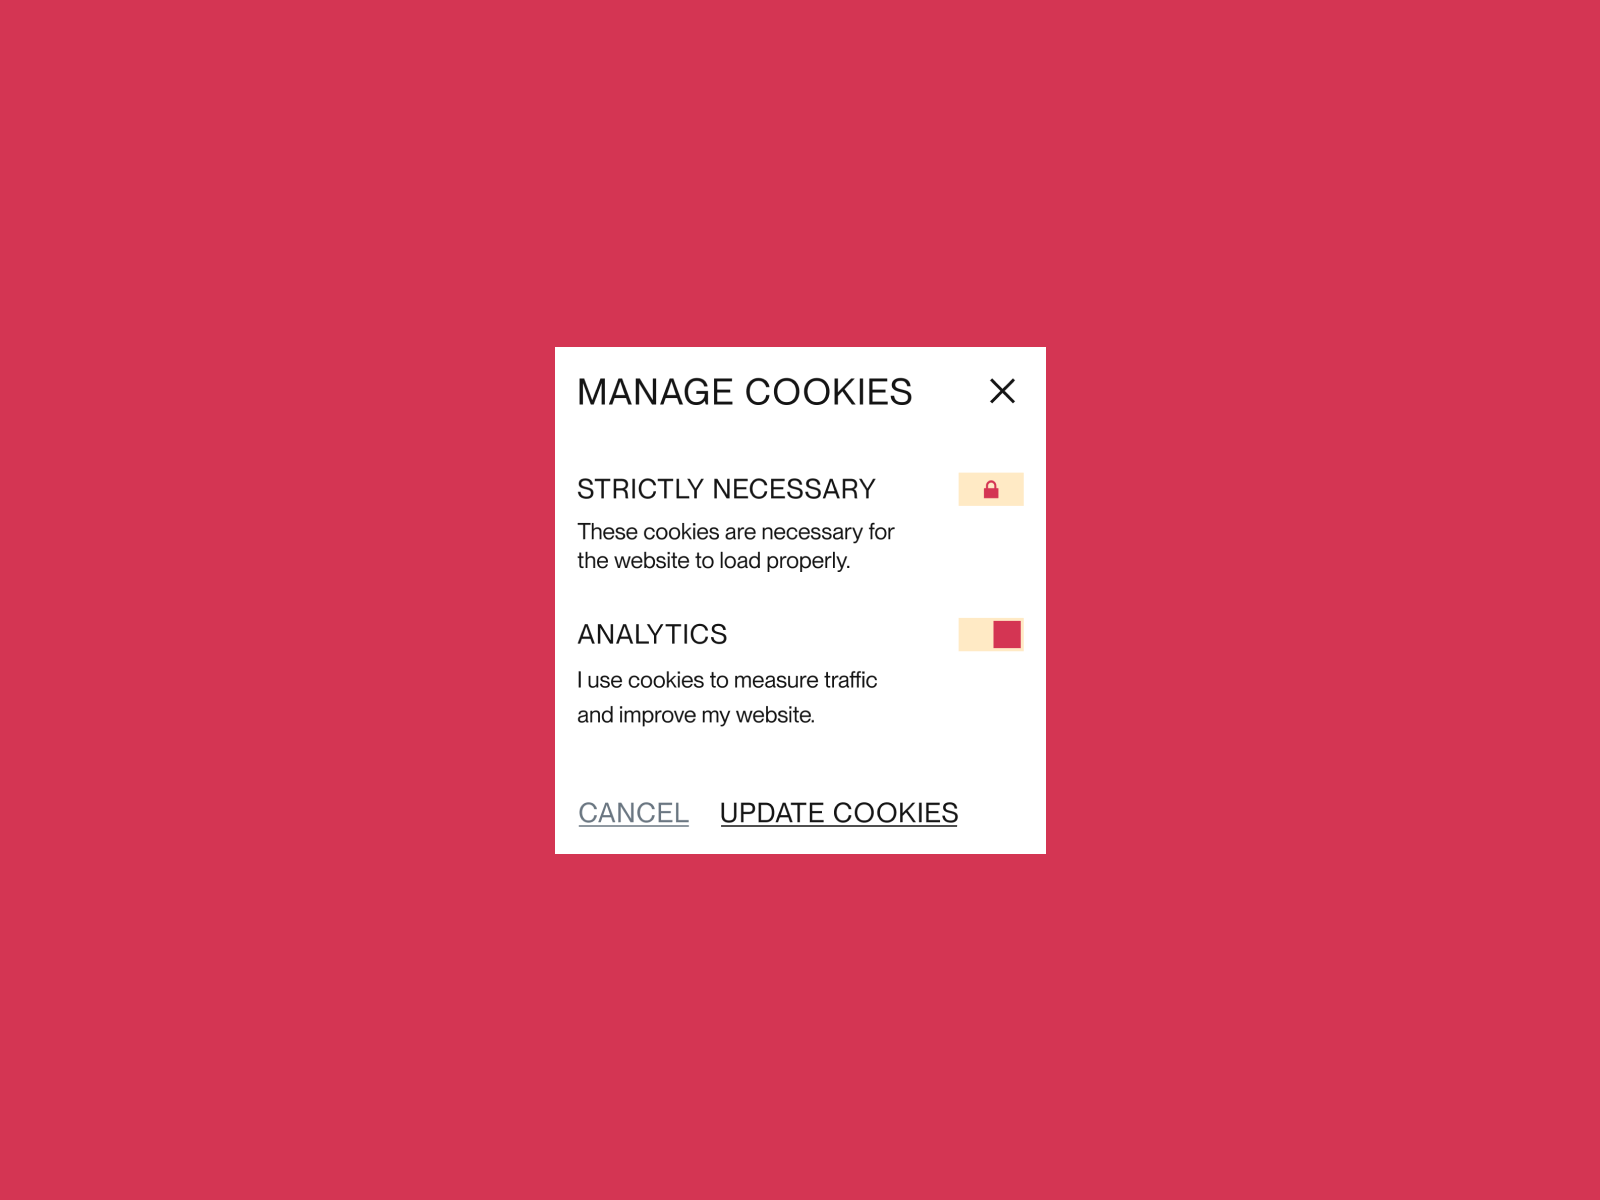 Manage Cookies